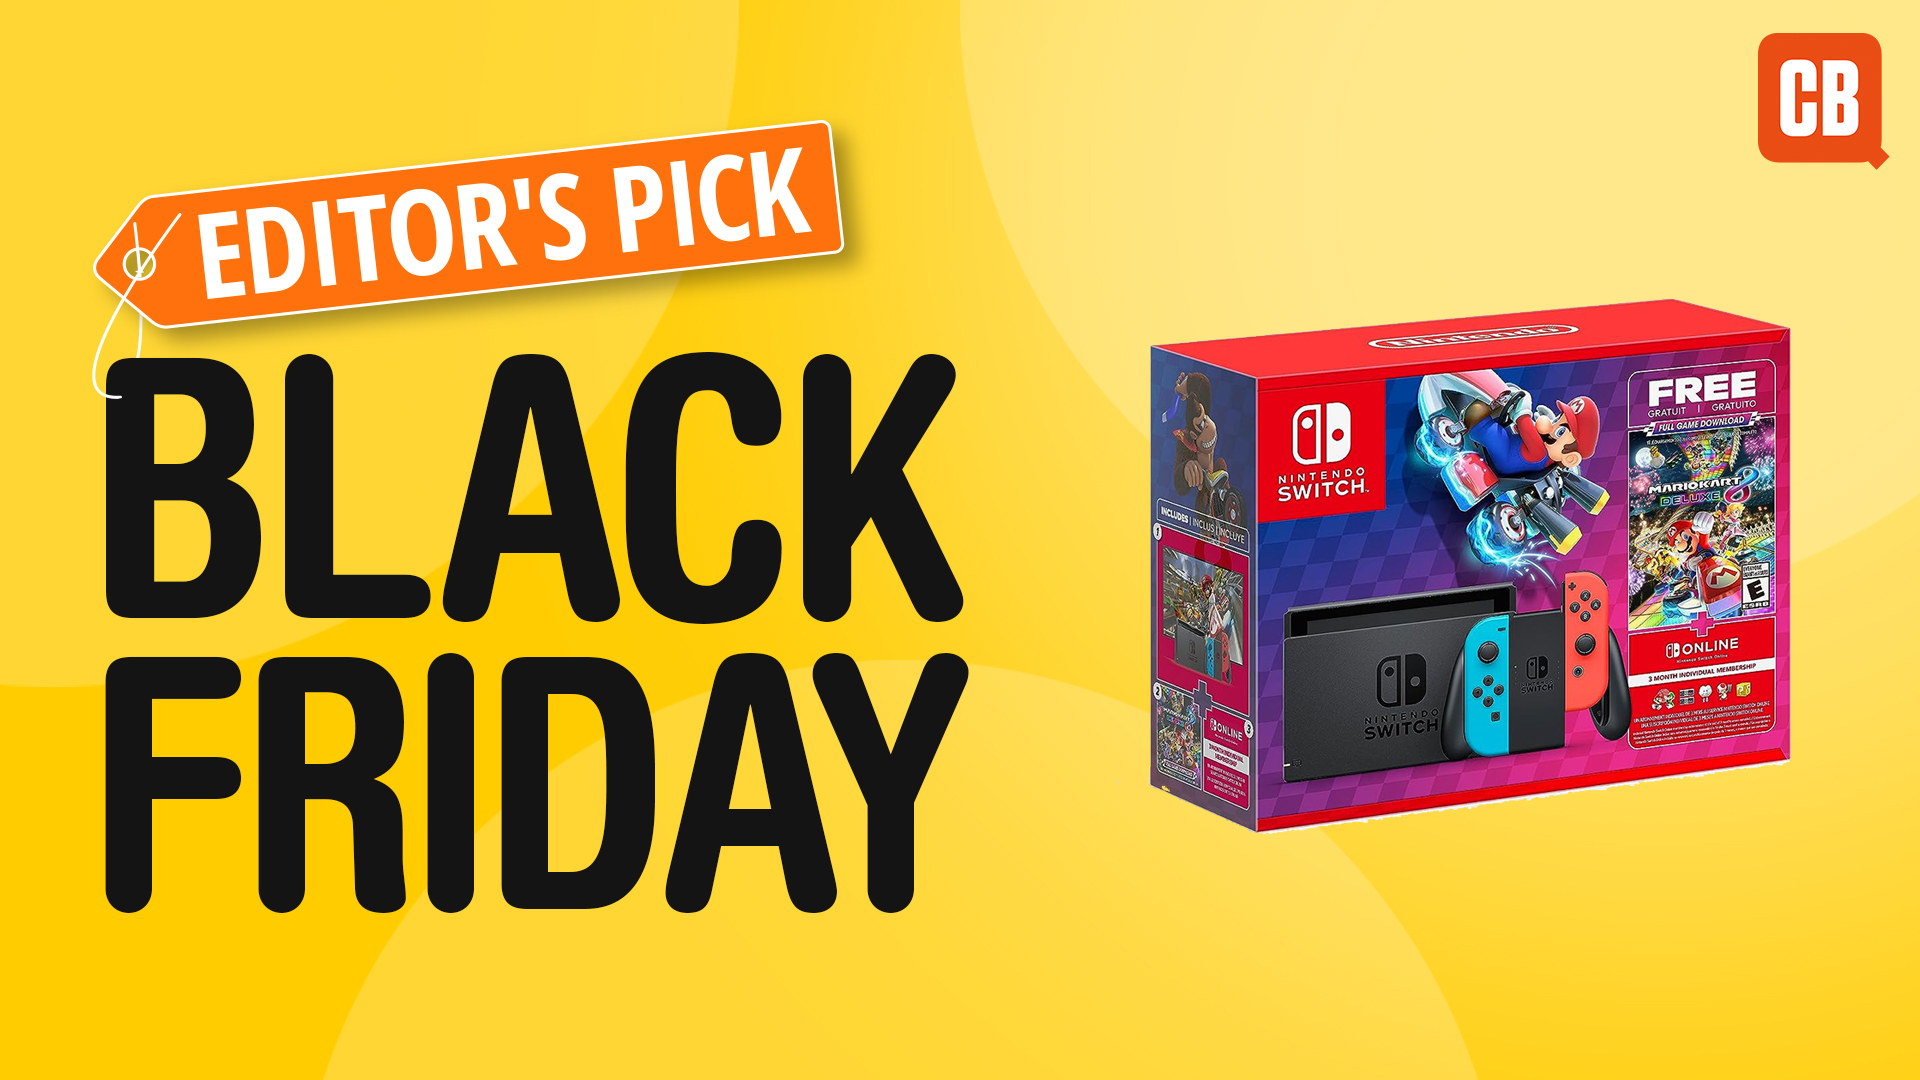 Black Friday is finally the time I upgrade to a Nintendo Switch